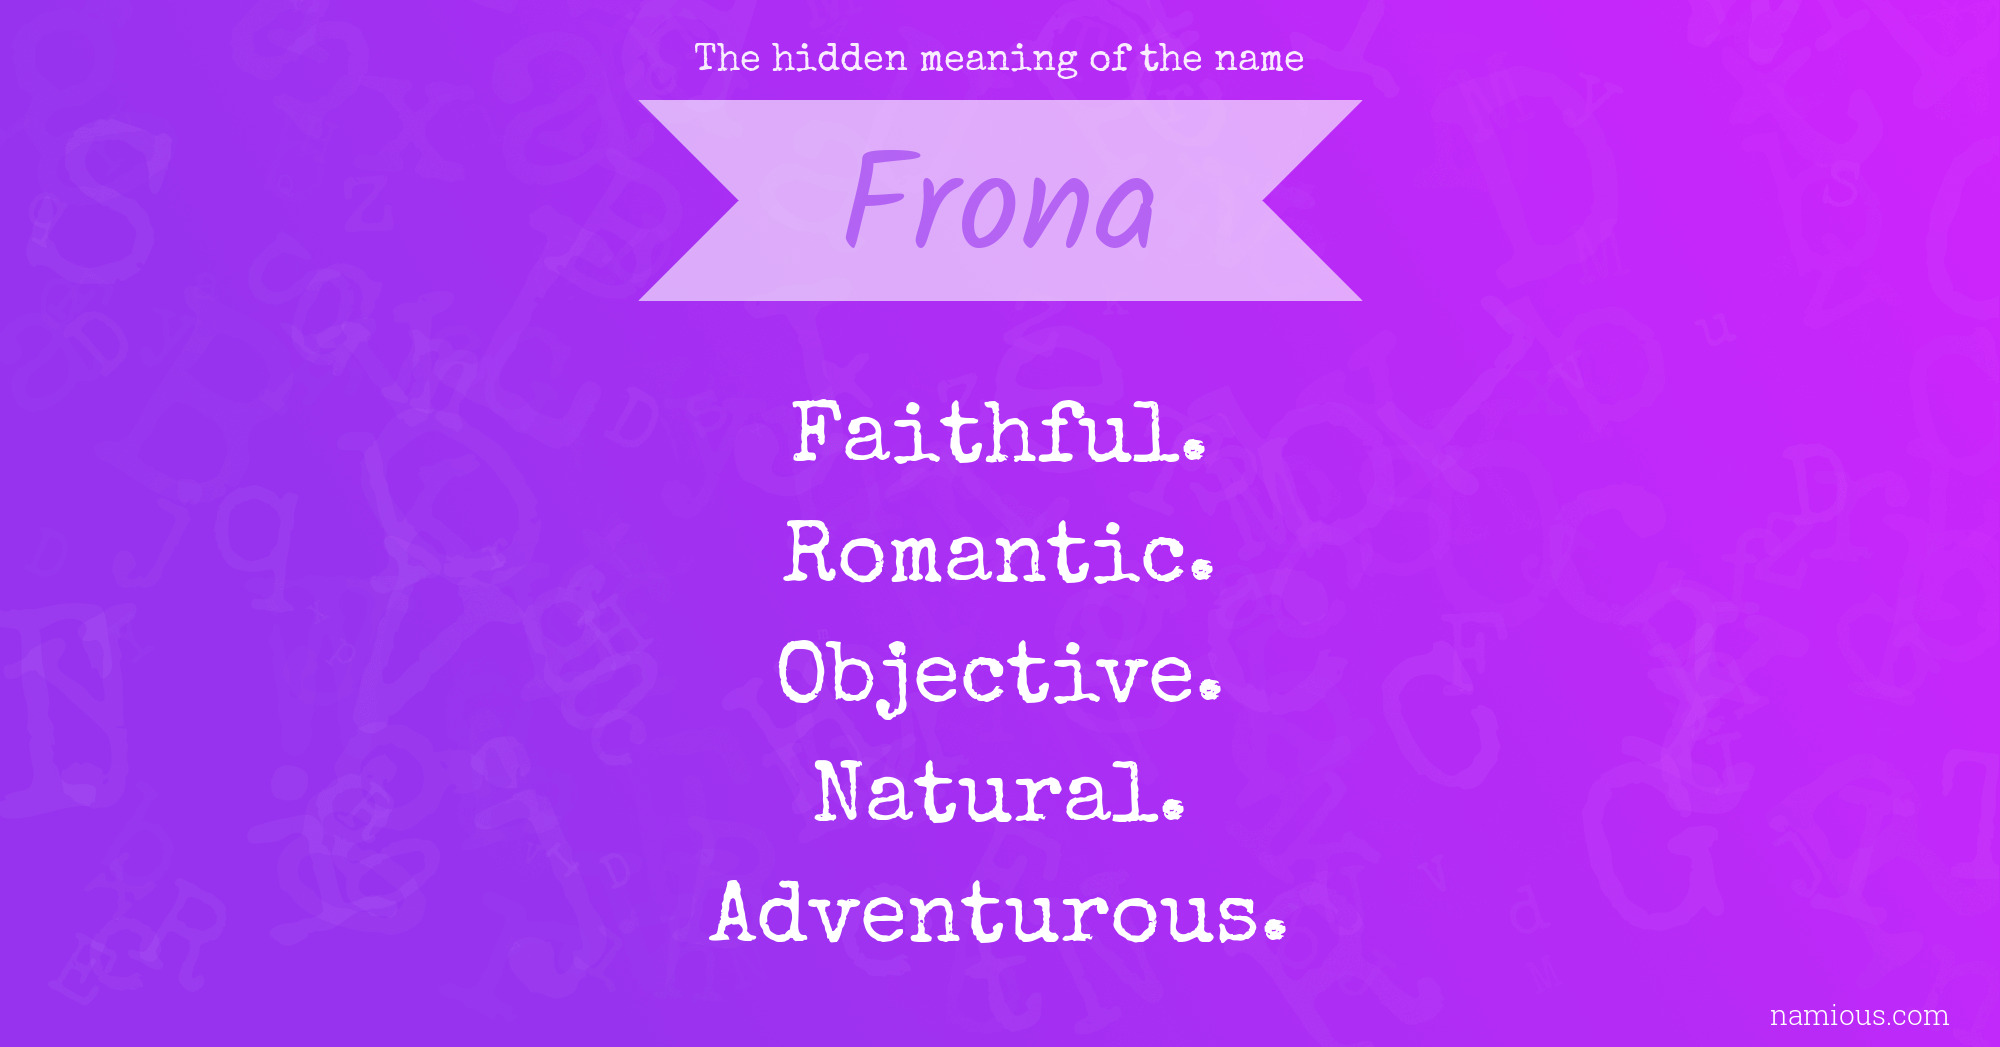 The hidden meaning of the name Frona